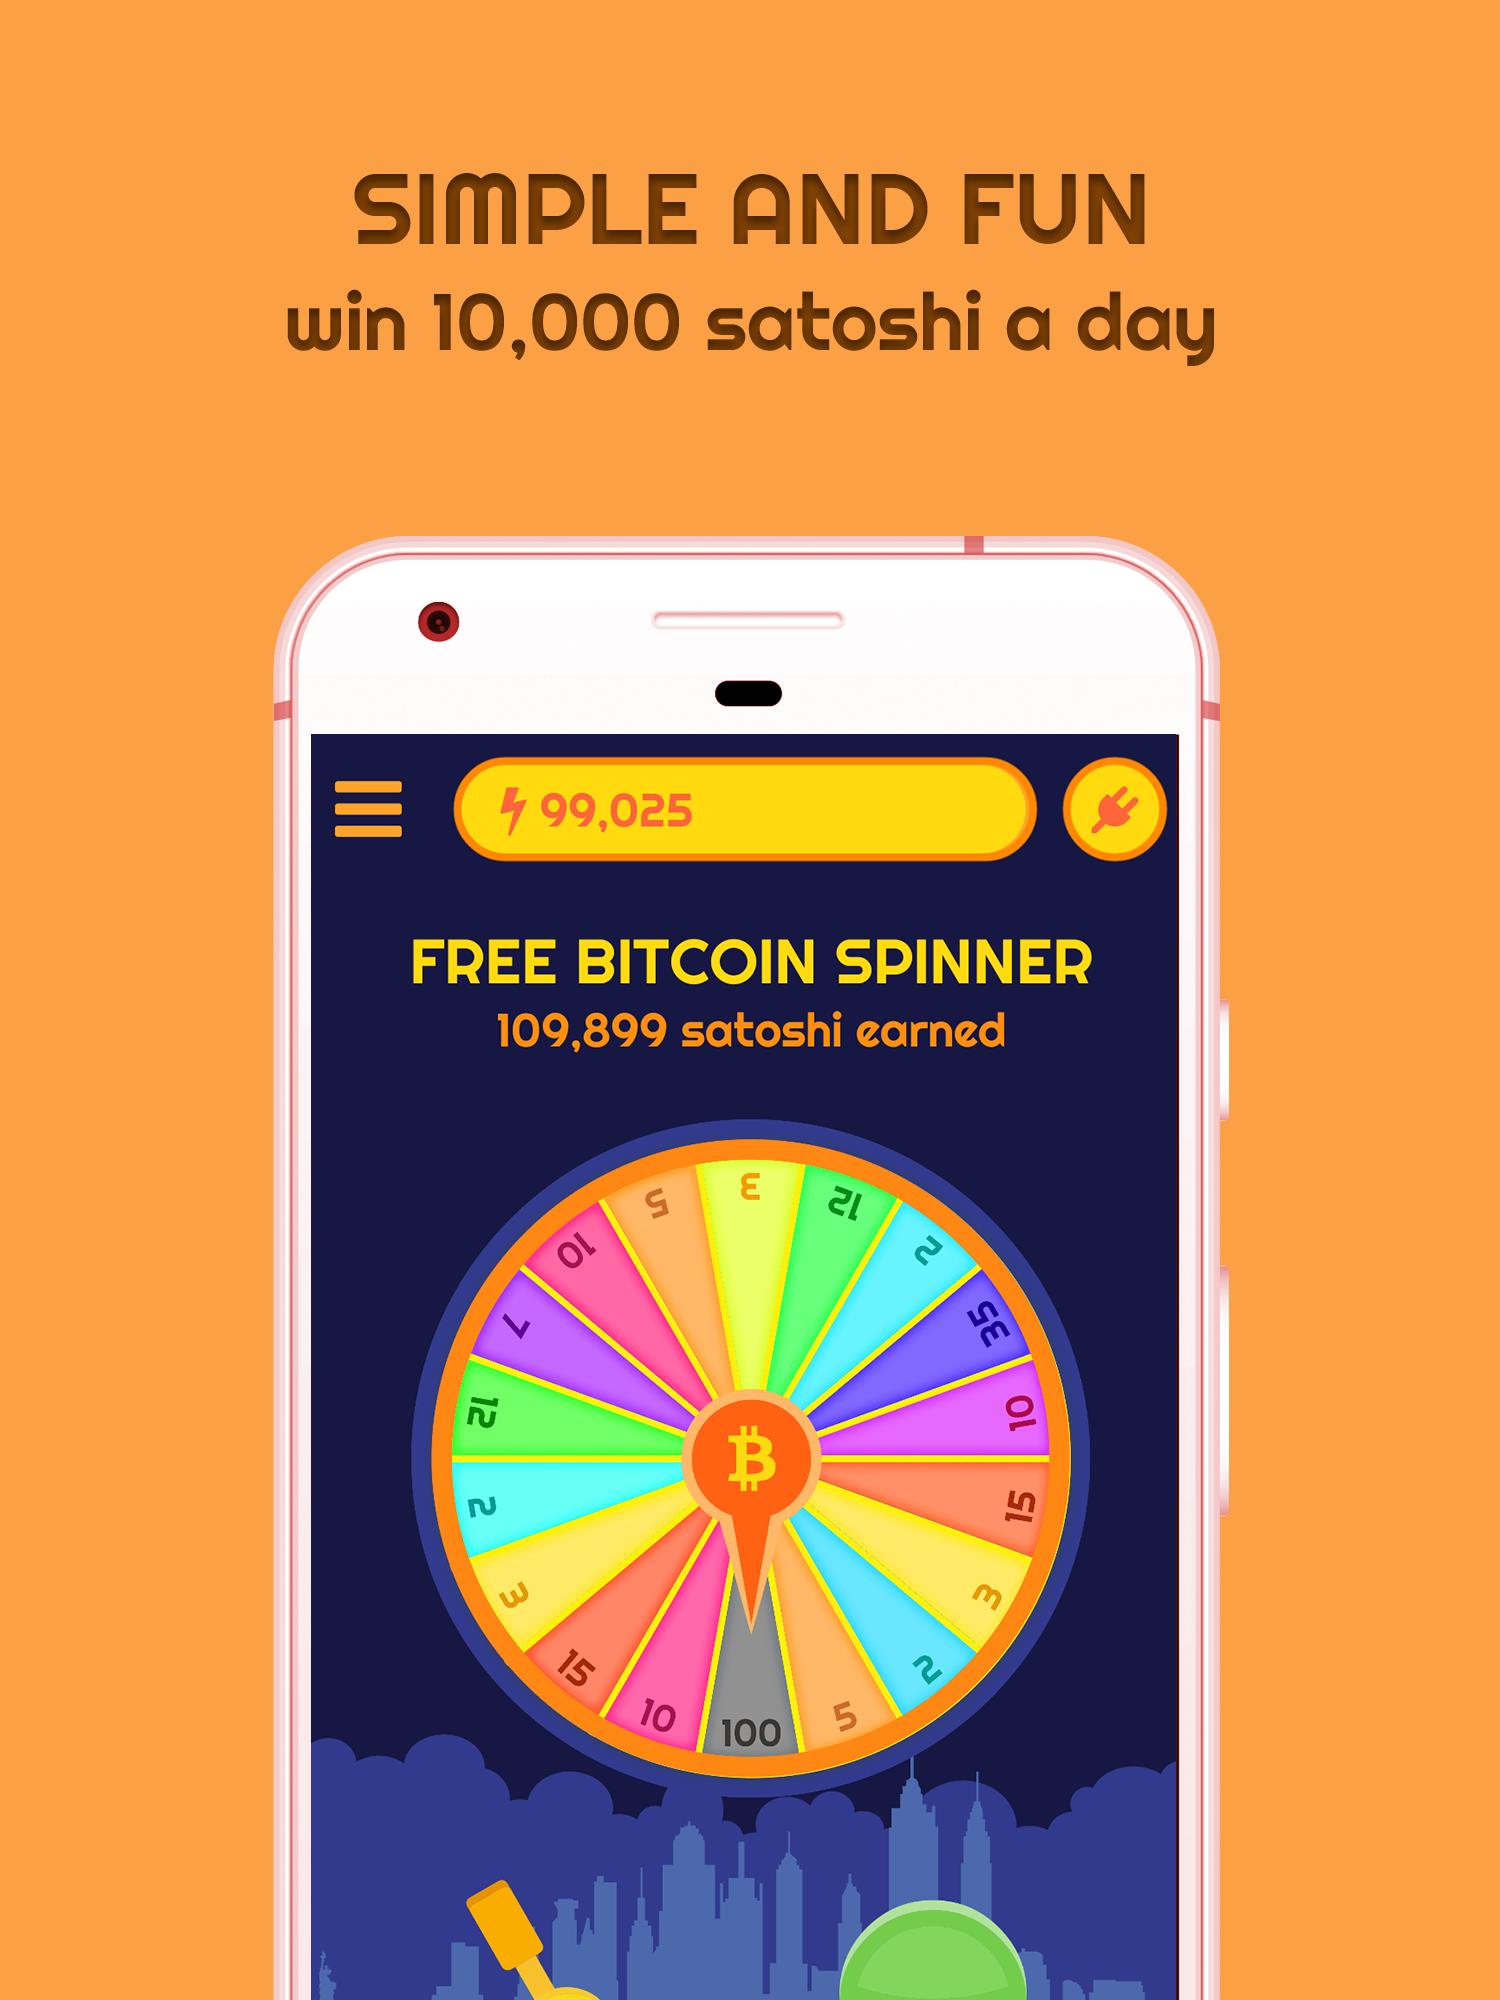 Free Bitcoin Spinner For Android Apk Download - free bitcoin spinner screenshot 4